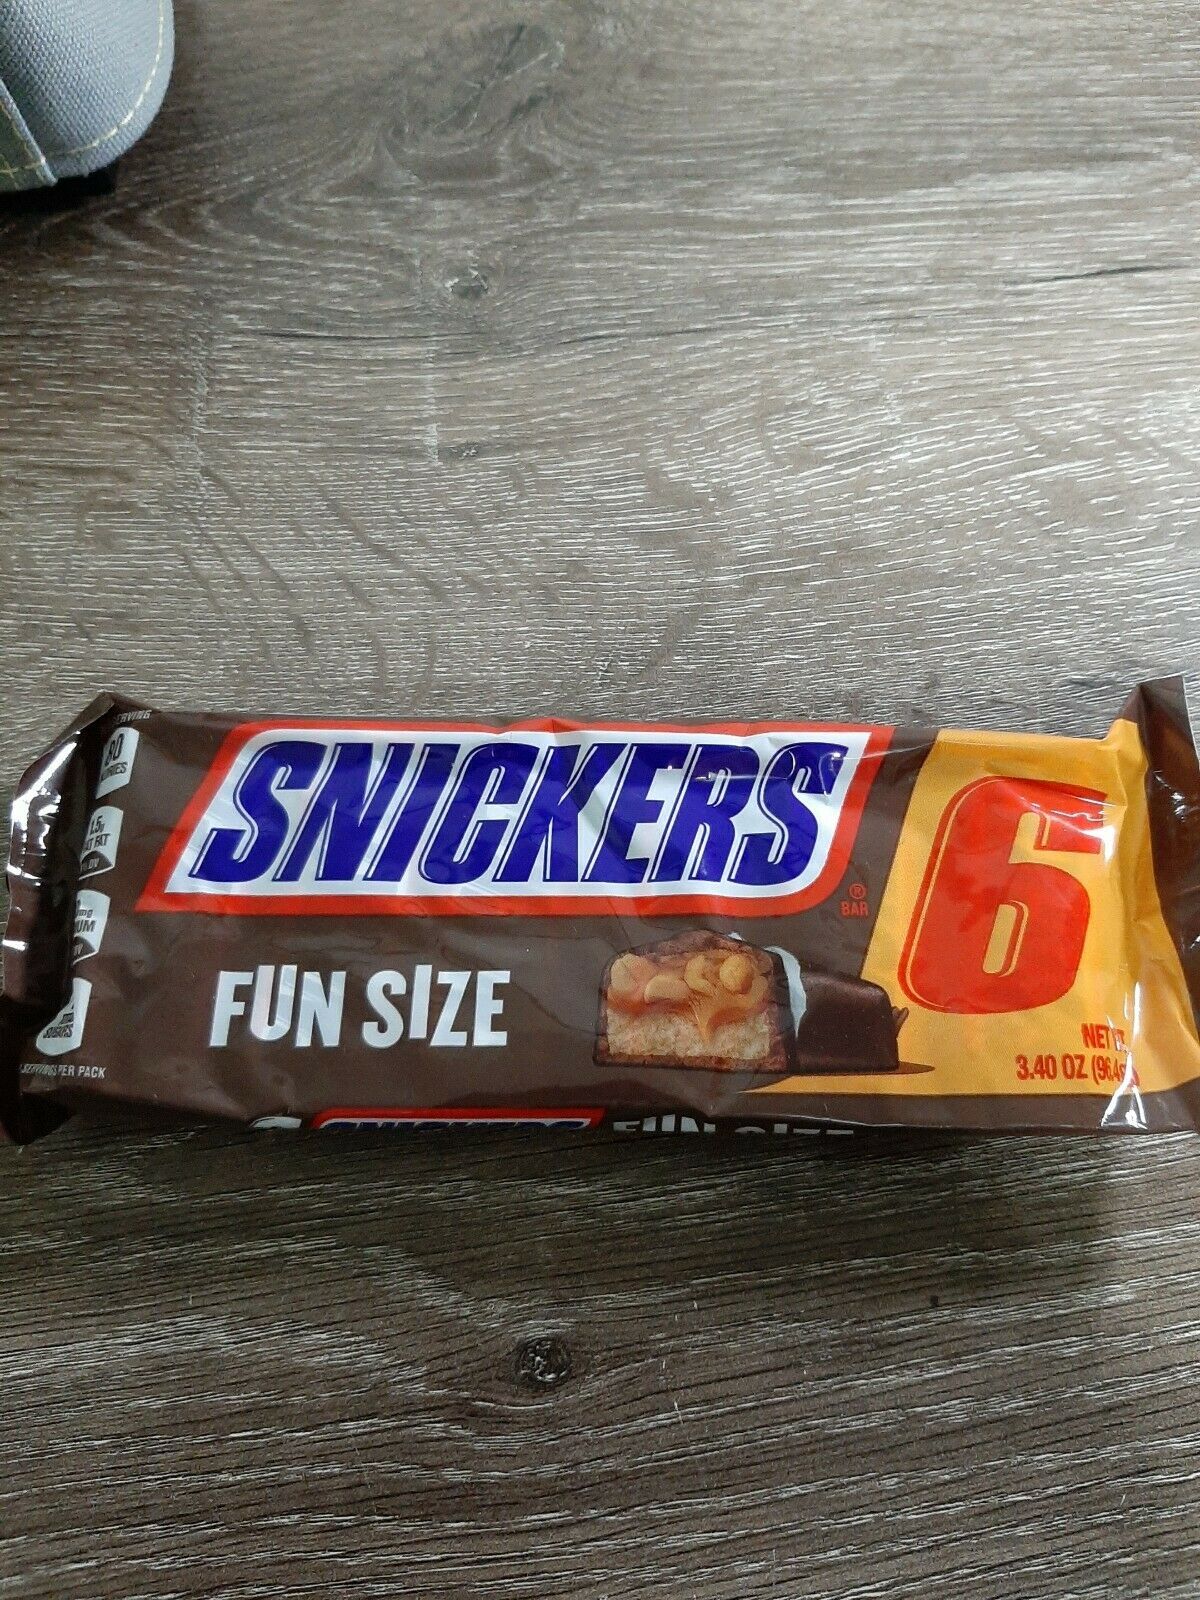 2 Packs of Snickers. 6 Fun Size Candy Bars. 3.40oz packs. - Chocolate ...